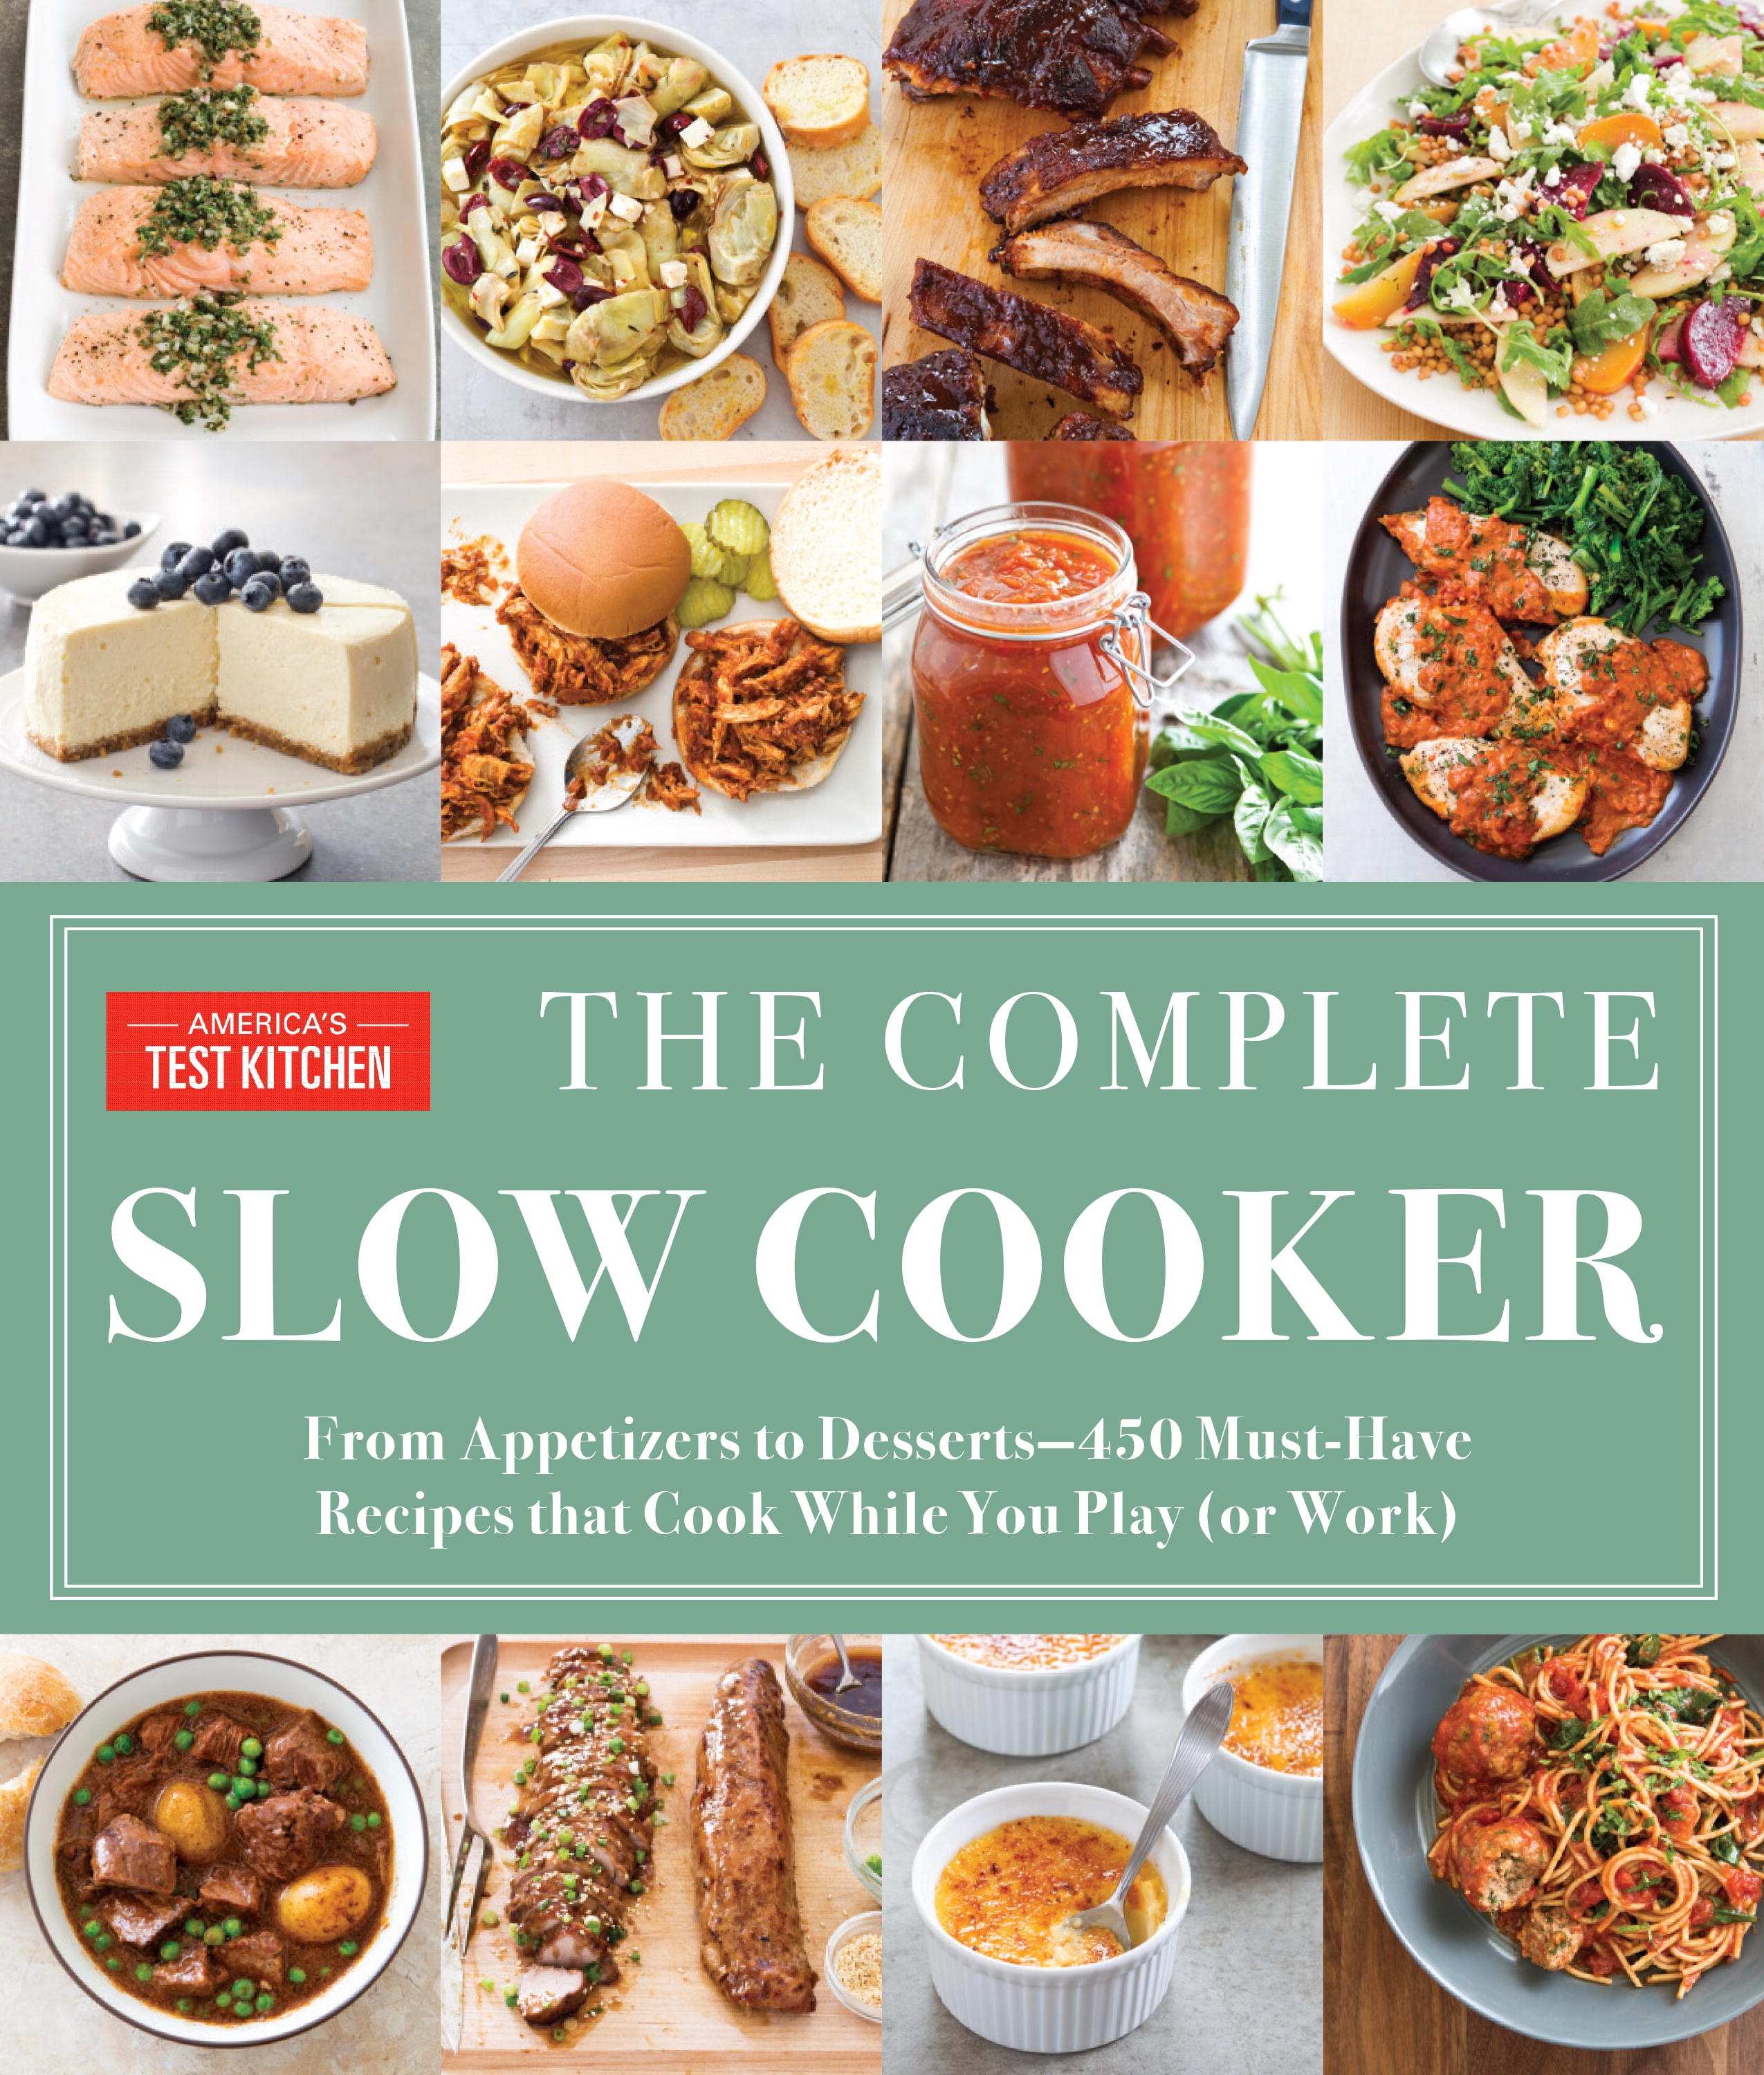 The Complete Slow Cooker by America's Test Kitchen - Penguin Books ...